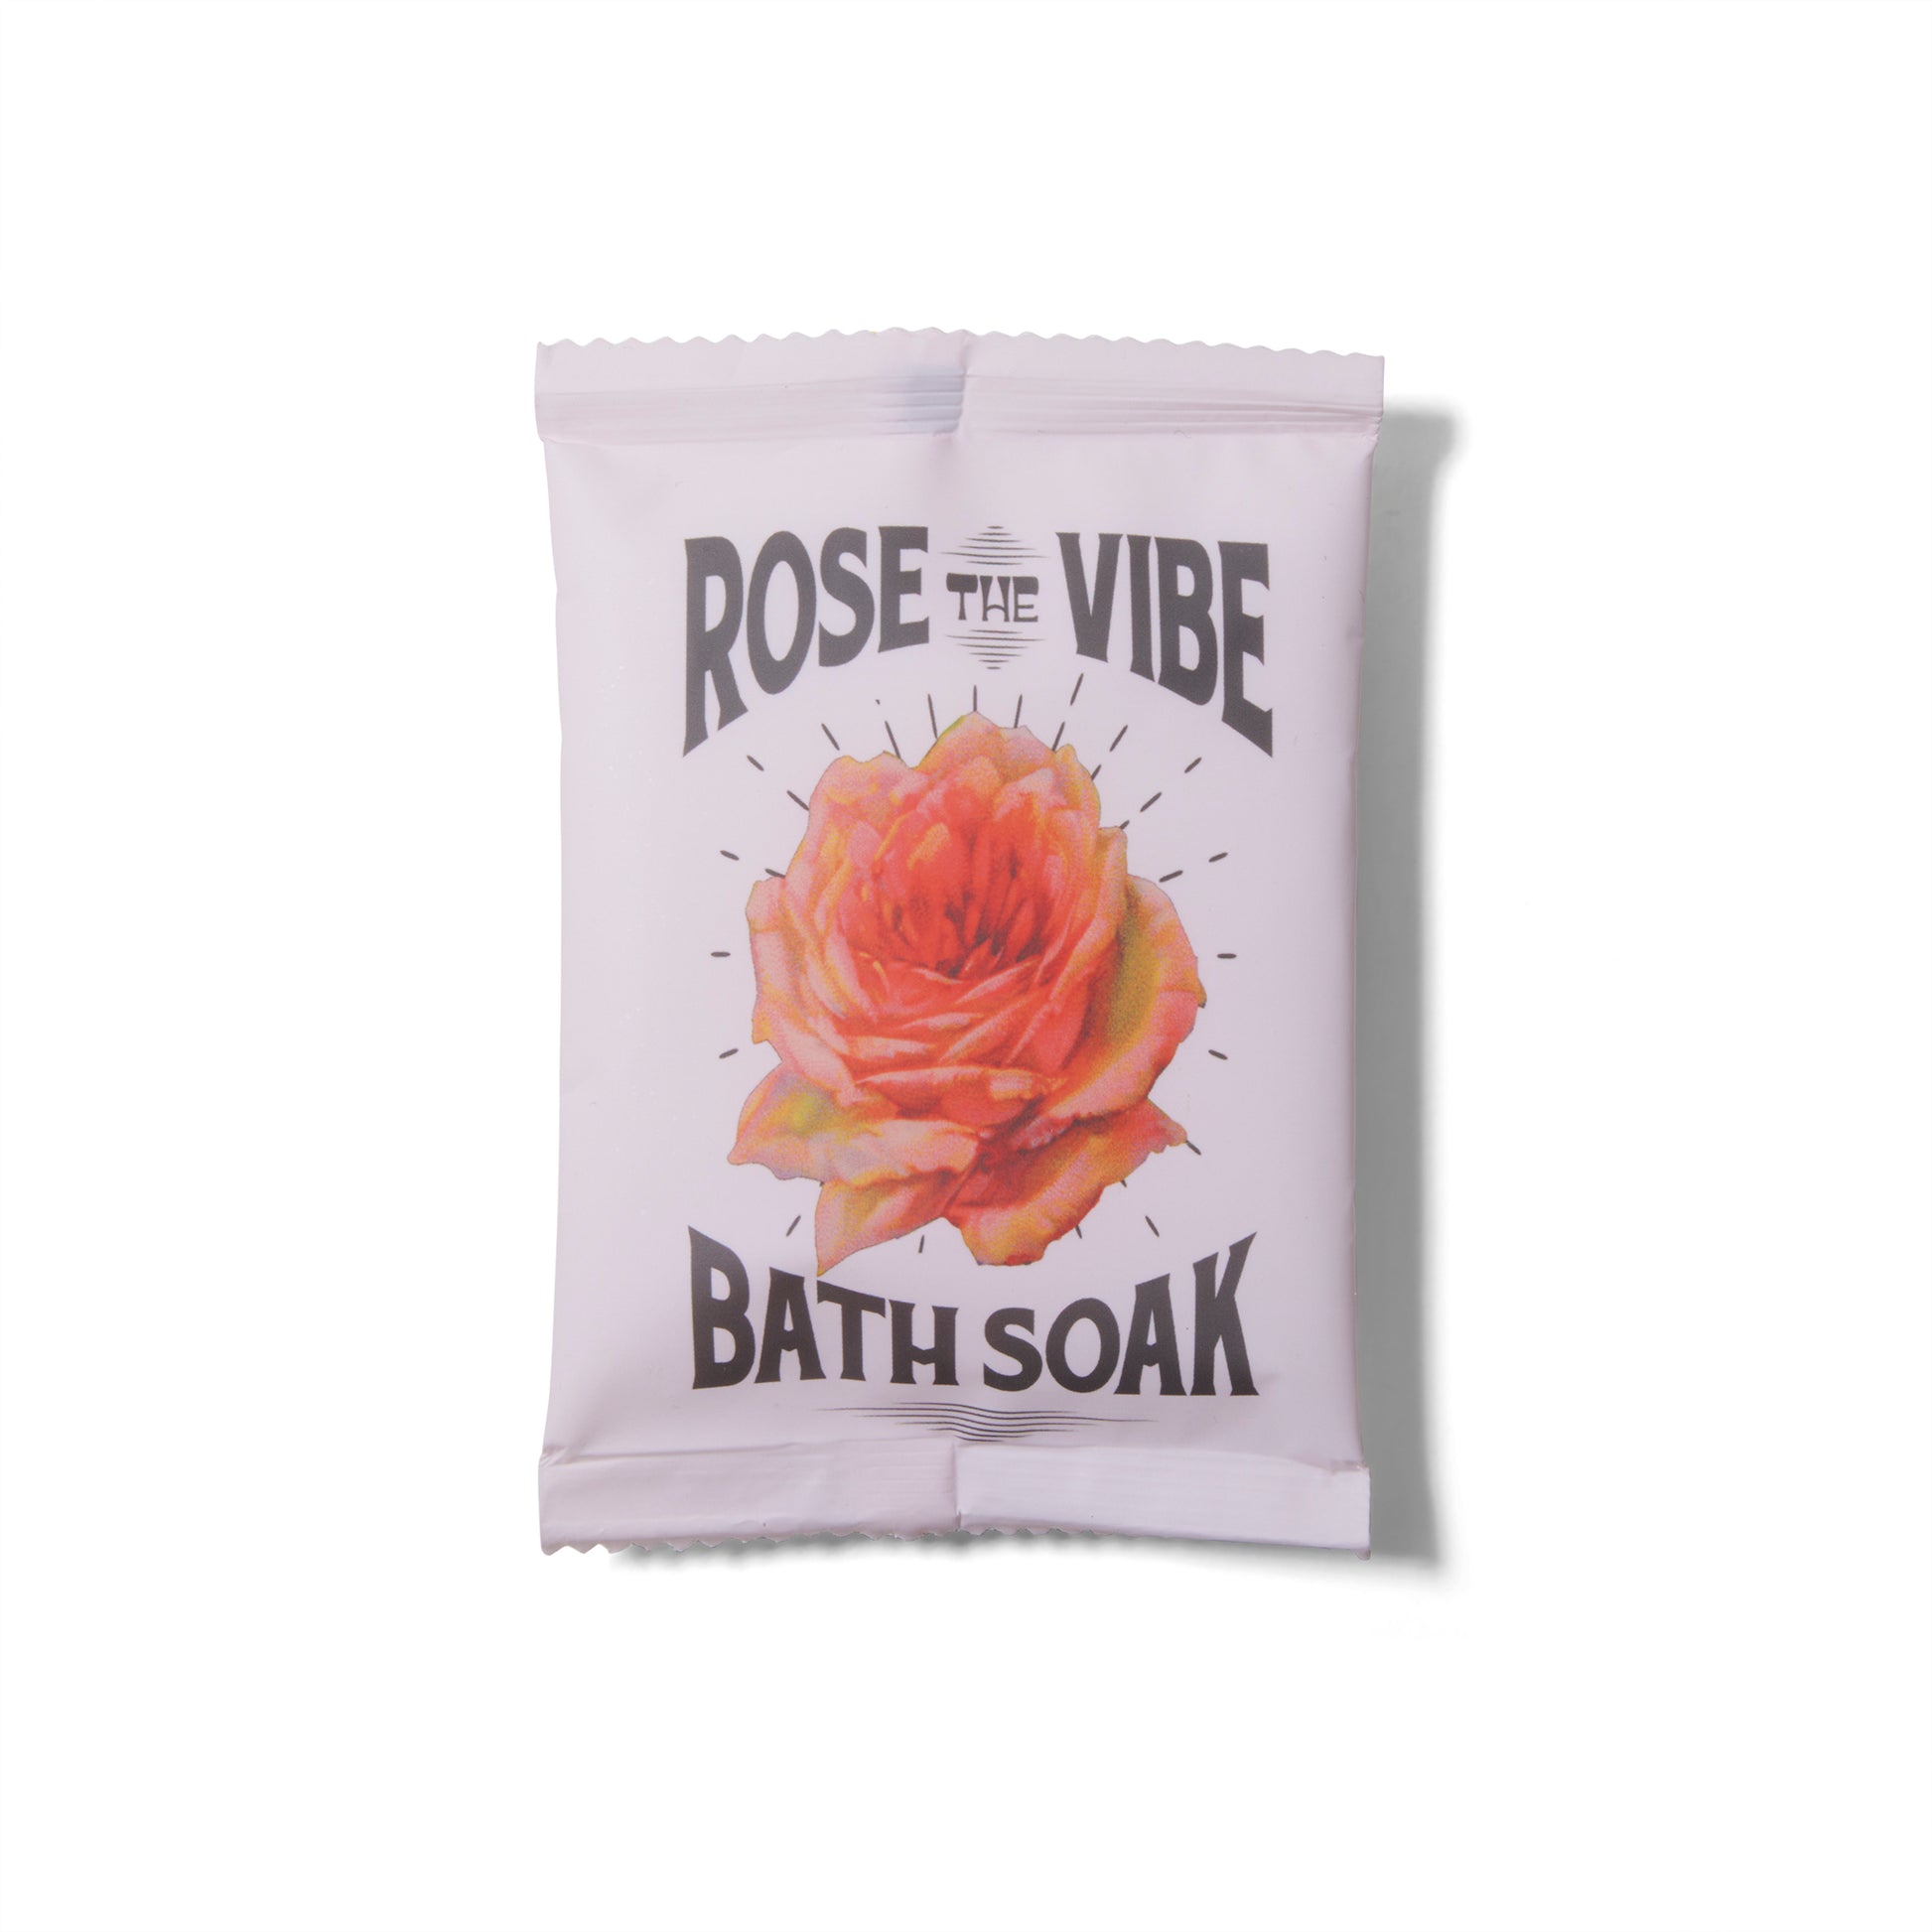 The Wild Yonder Organic Bath Salts in Rose the Vibe. There is an illustration of a rose on the package. 